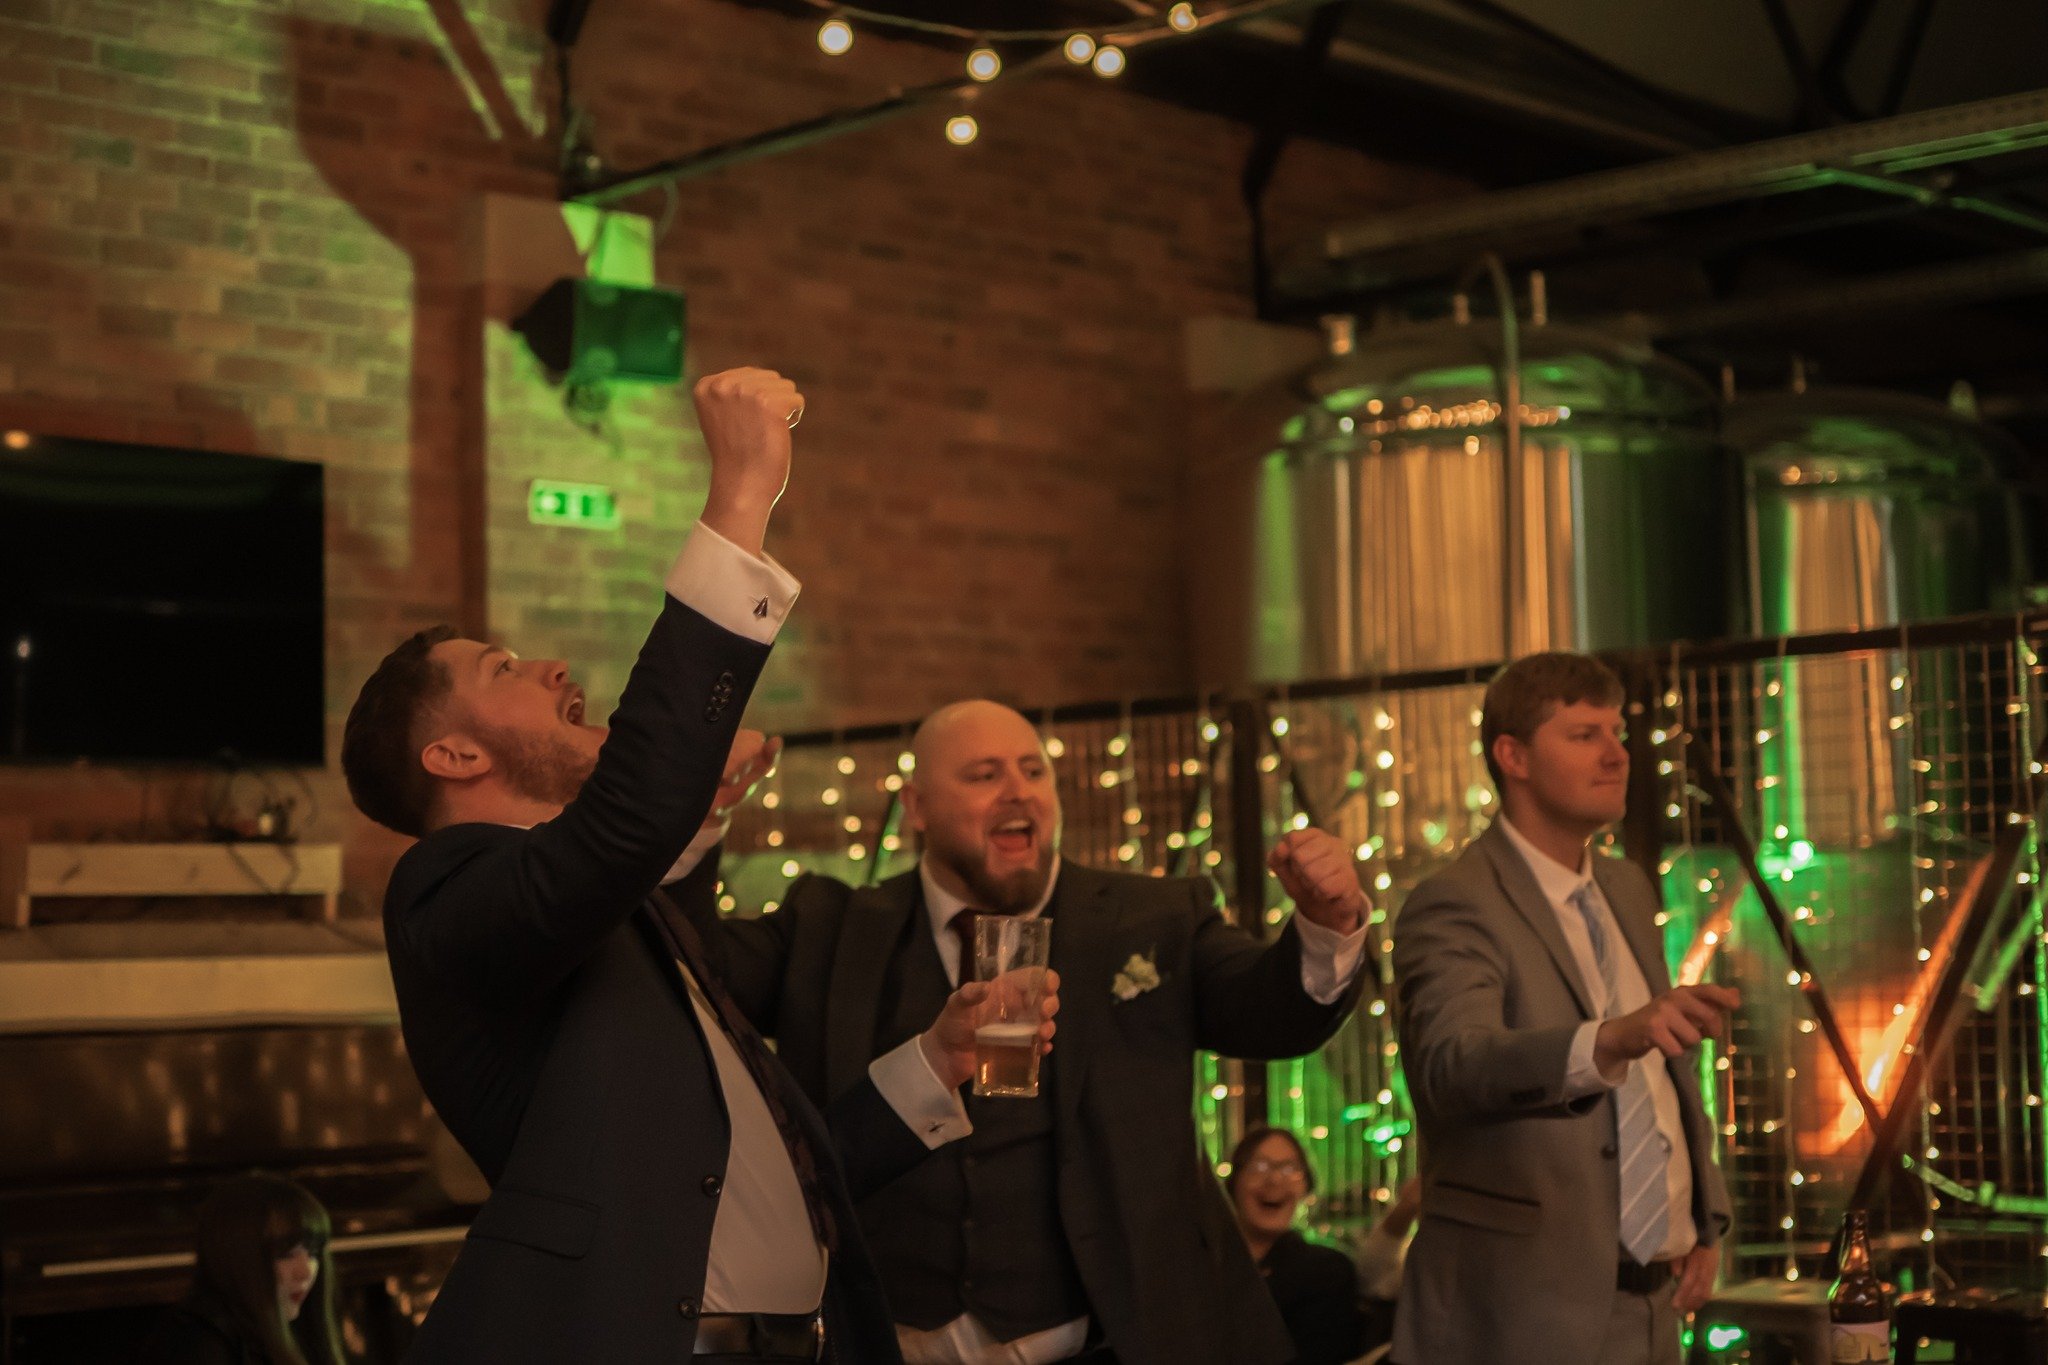 This photo may look like wedding guests enjoying themselves but it's so much more... it was a girls vs boys beer pong match, which went on for around 90 minutes and this is the moment the boys finally won!!

We were all glad it was over 🤣

 #northea